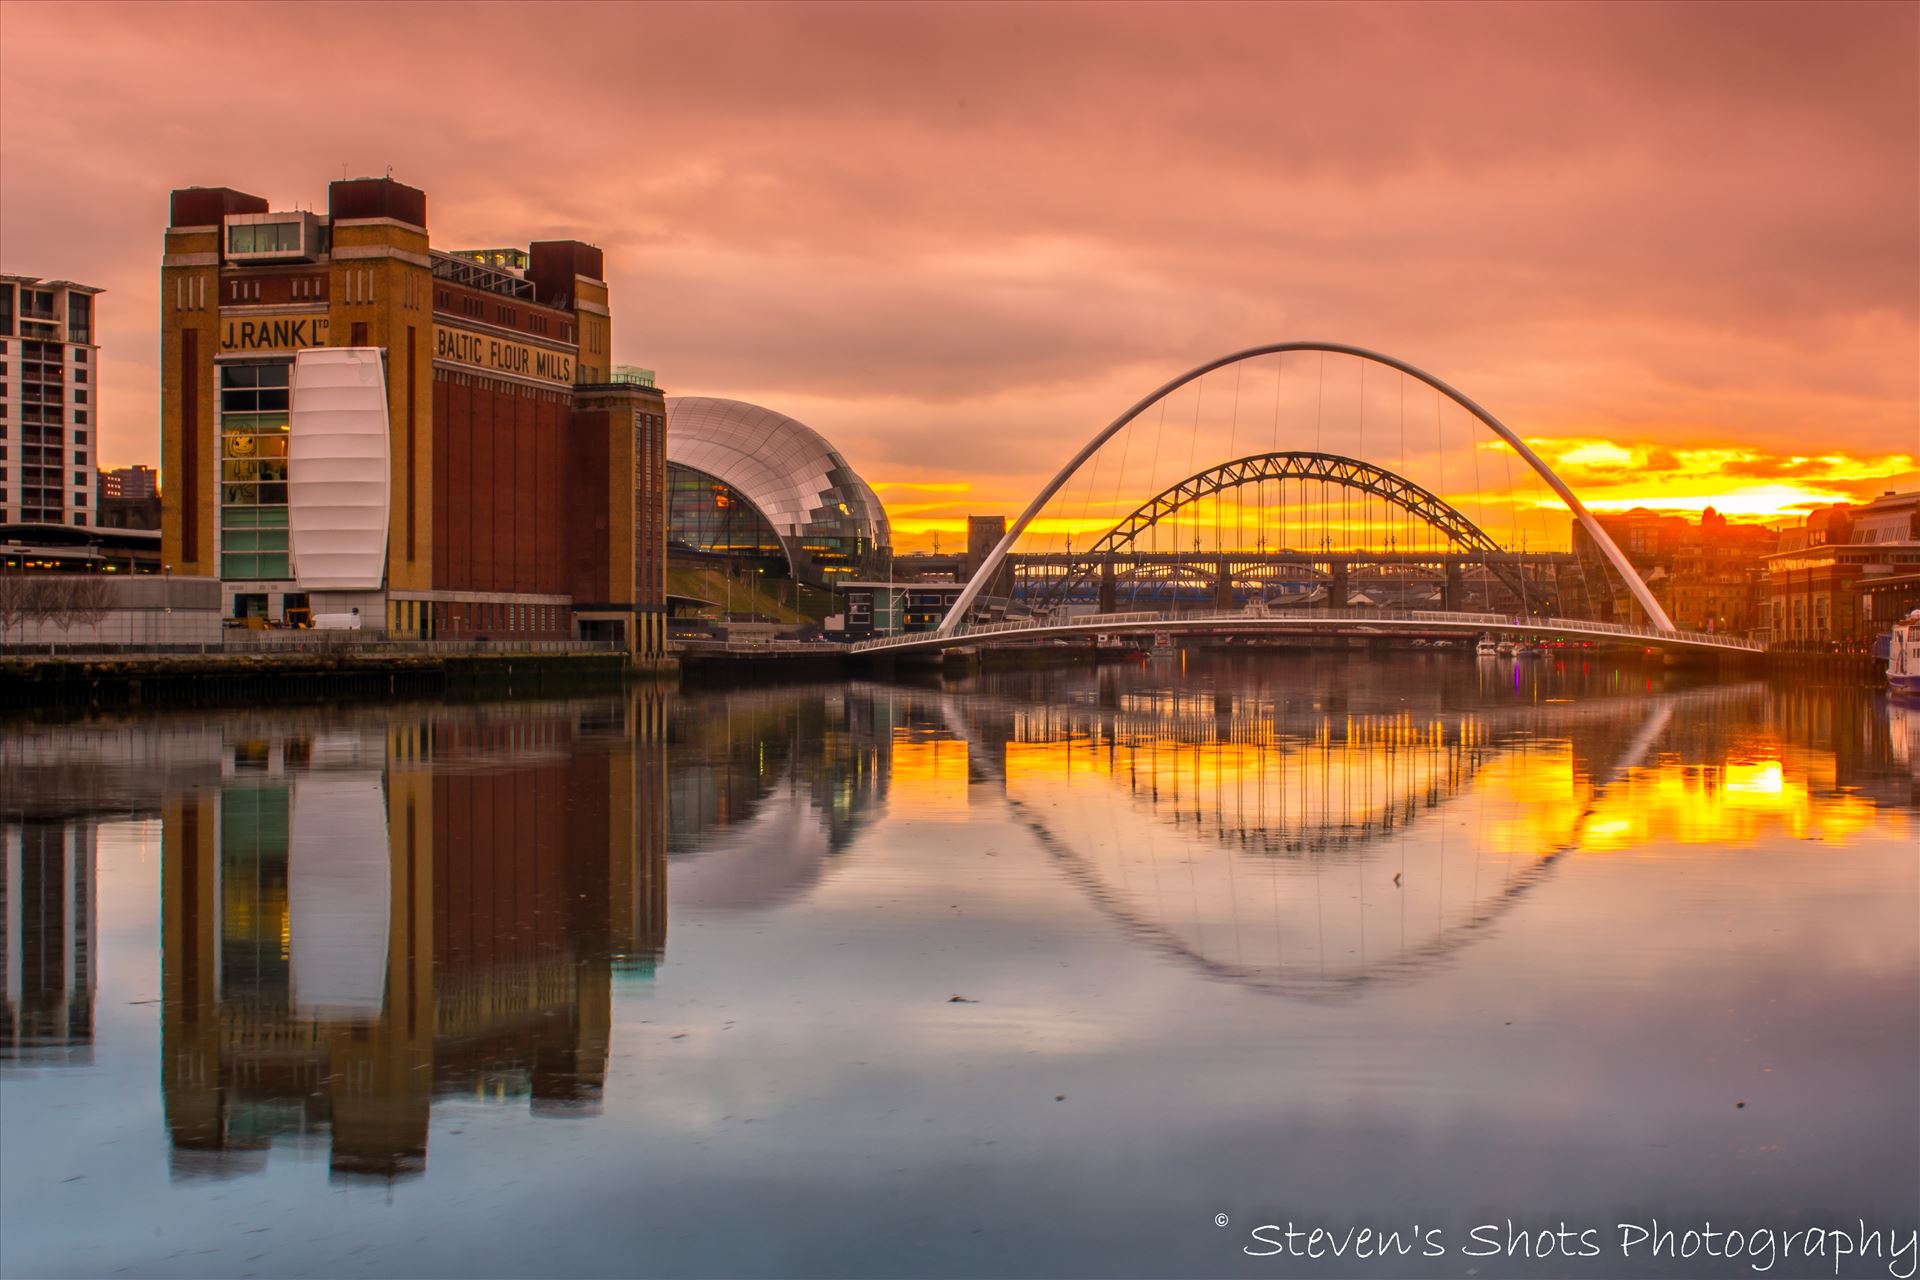 Sunset on the Tyne A sunset on the River Tyne with the Baltic, Sage, Millennium Bridge and Tyne Bridge, also a good reflection in the water. by Steven's Shots Photography